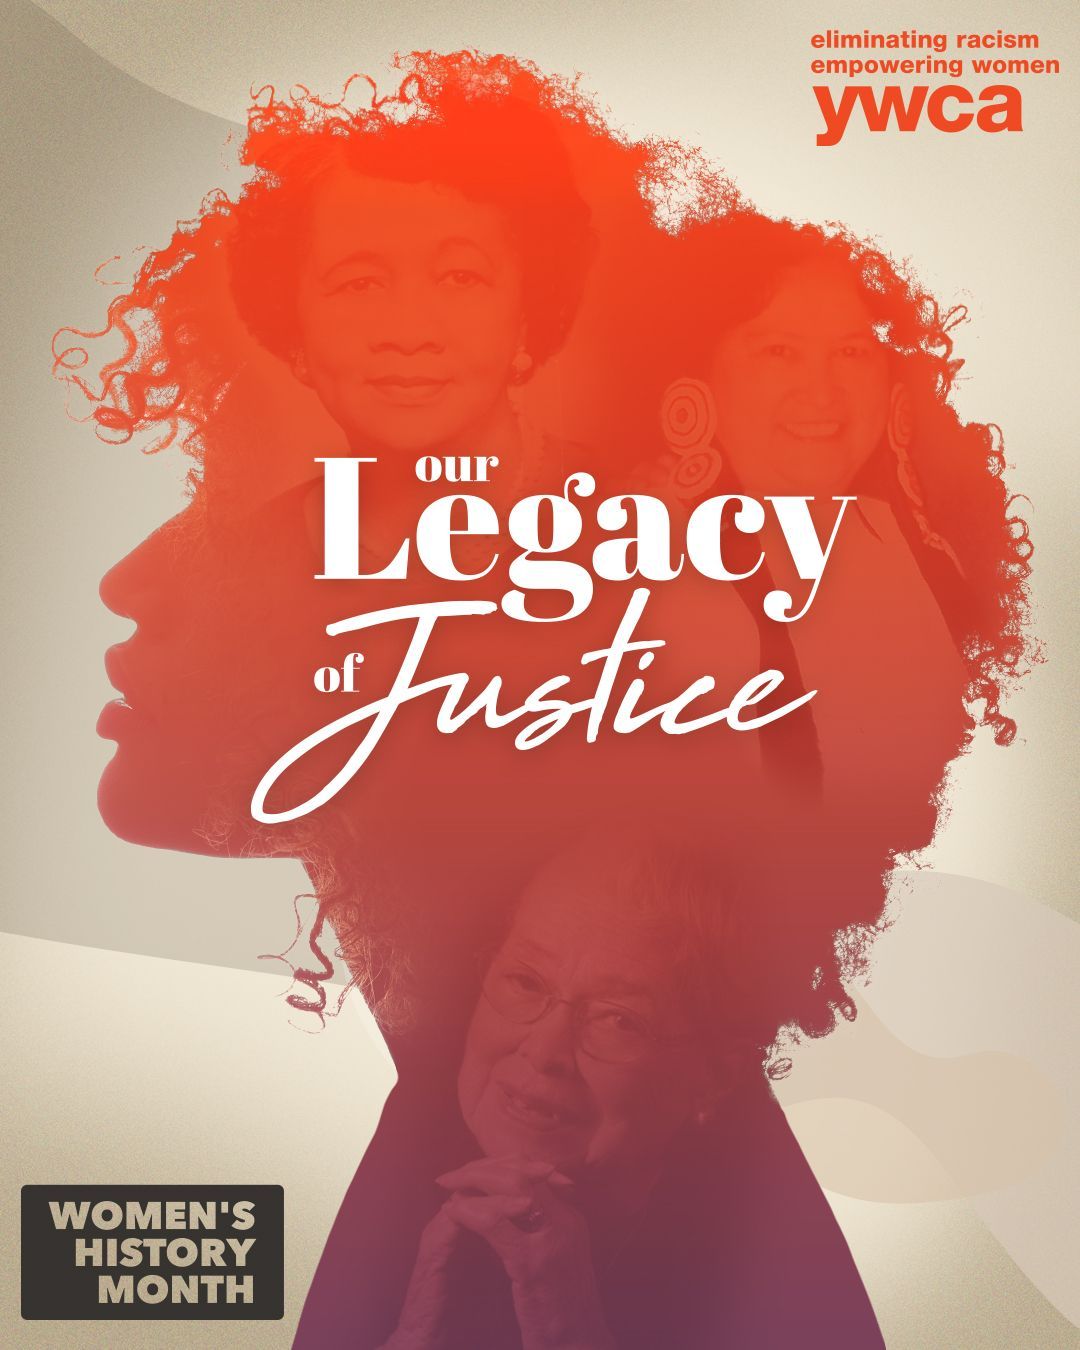 YWCA Women's History Monty - A Legacy of Justice